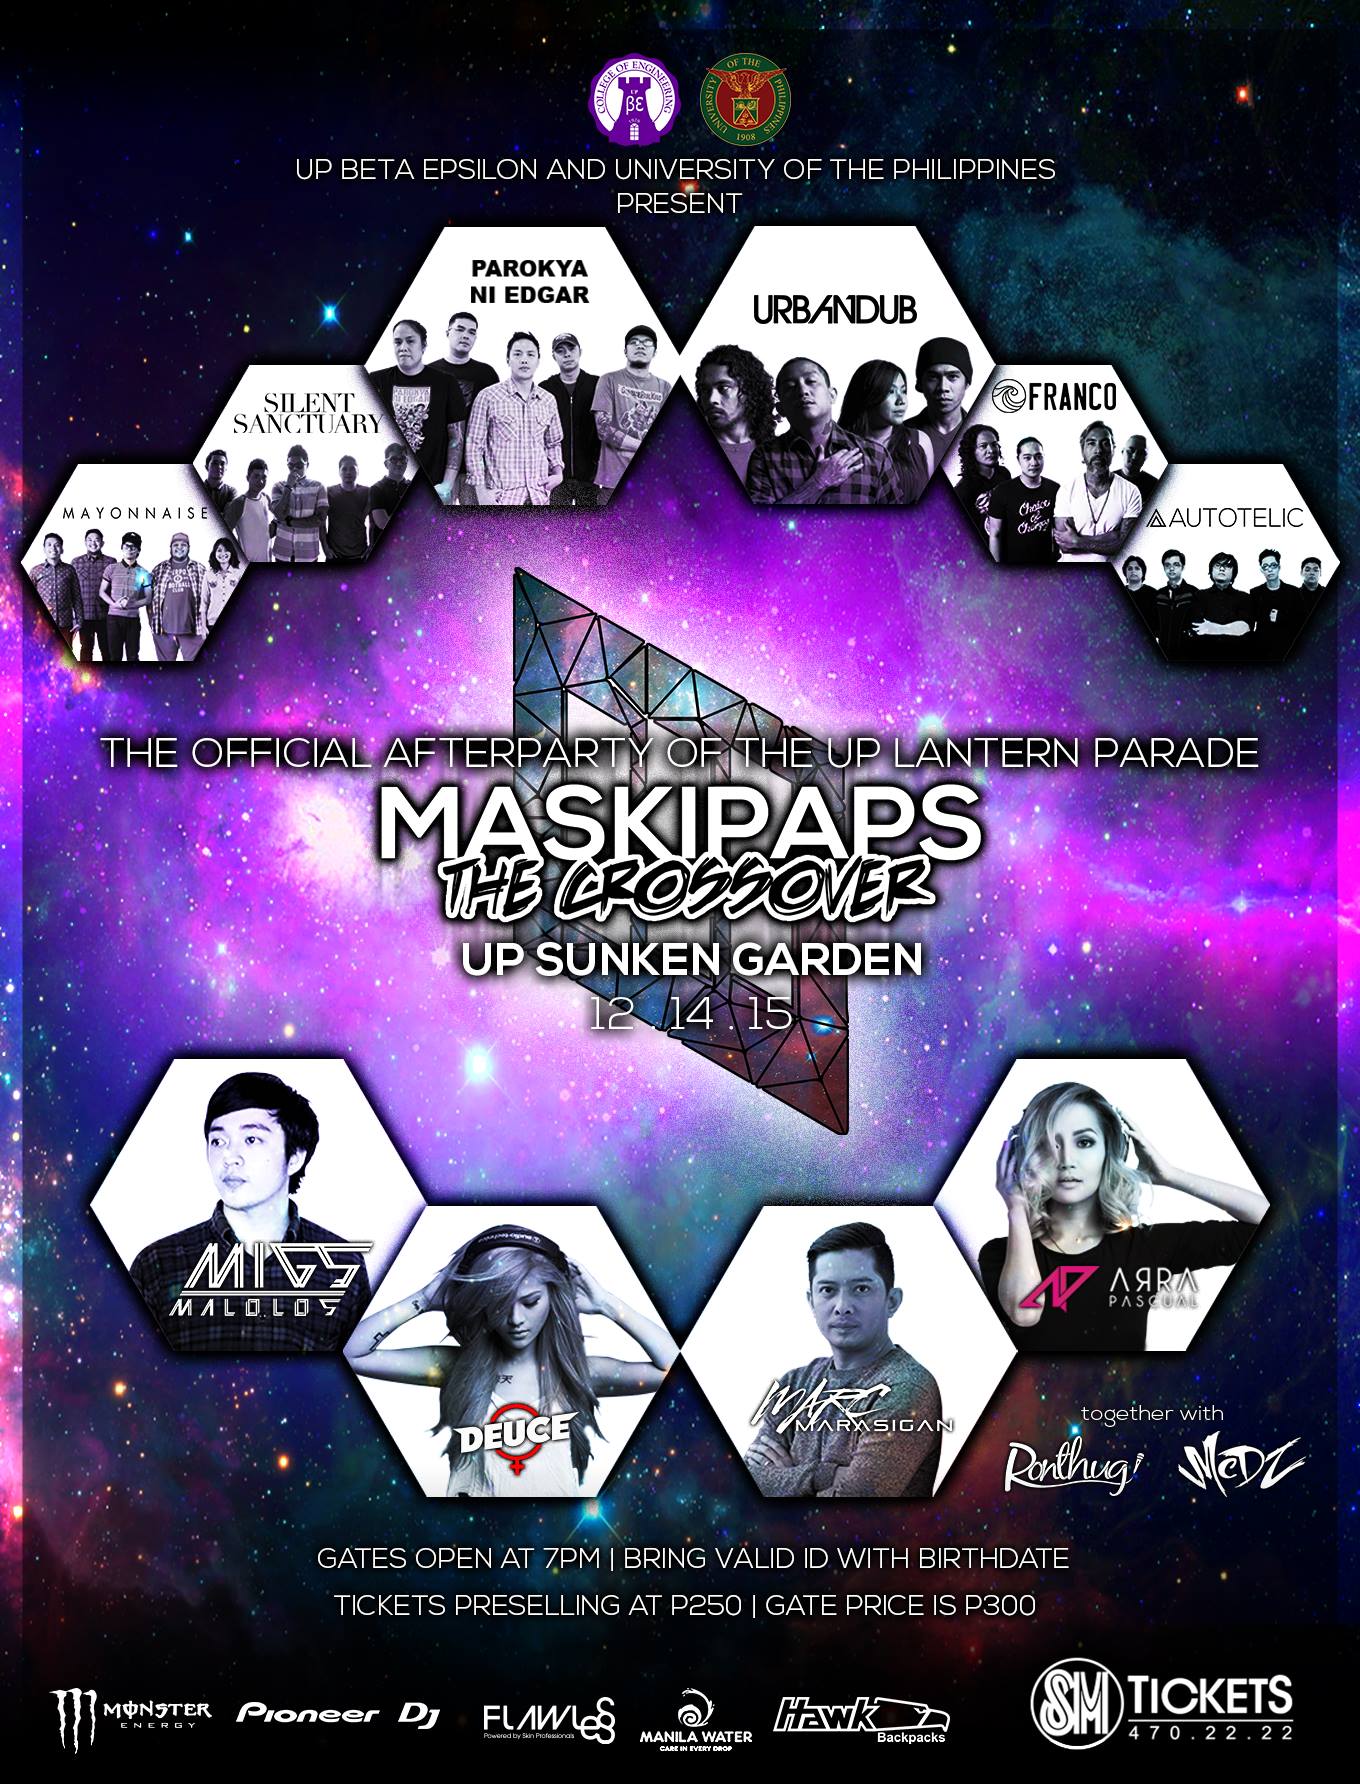 The OFFICIAL Afterparty of the UP Lantern Parade clock Monday, December 14 at 7:00pm pin Show Map UP Sunken Garden UP Diliman, Quezon City, Philippines ticket Find Tickets Tickets Available smtickets.com Better days are coming. UP BETA EPSILON and UP Diliman together with Pioneer DJ - Philippines, Monster Energy, and HAWK bag present Maskipaps: The Crossover The Official Afterparty of the UP Lantern Parade UP Sunken Garden | December 14, 2015 Performances by: Parokya ni Edgar Urbandub silent sanctuary Franco Suspitsados Mayonnaise Autotelic Beats by: Deuce Manila Marc Marasigan Arra Pascual migs malolos Together with MC Ronthug M.C. DZ --- Pre-selling at P250. (P220 for UP); Gate price at P300. Tickets are available at all SM Tickets in SM Cinema Branches located across the nationwide chain of SM Supermalls. For inquiries and reservations, please call 470-2222. For UP student discounts, please go to http://tiny.cc/roadtotheotherside2 Stay tuned on all channels! Facebook: http://facebook.com/maskicrossover Twitter: http://twitter.com/maskicrossover IG: http://instagram.com/maskicrossover See you on the other side!